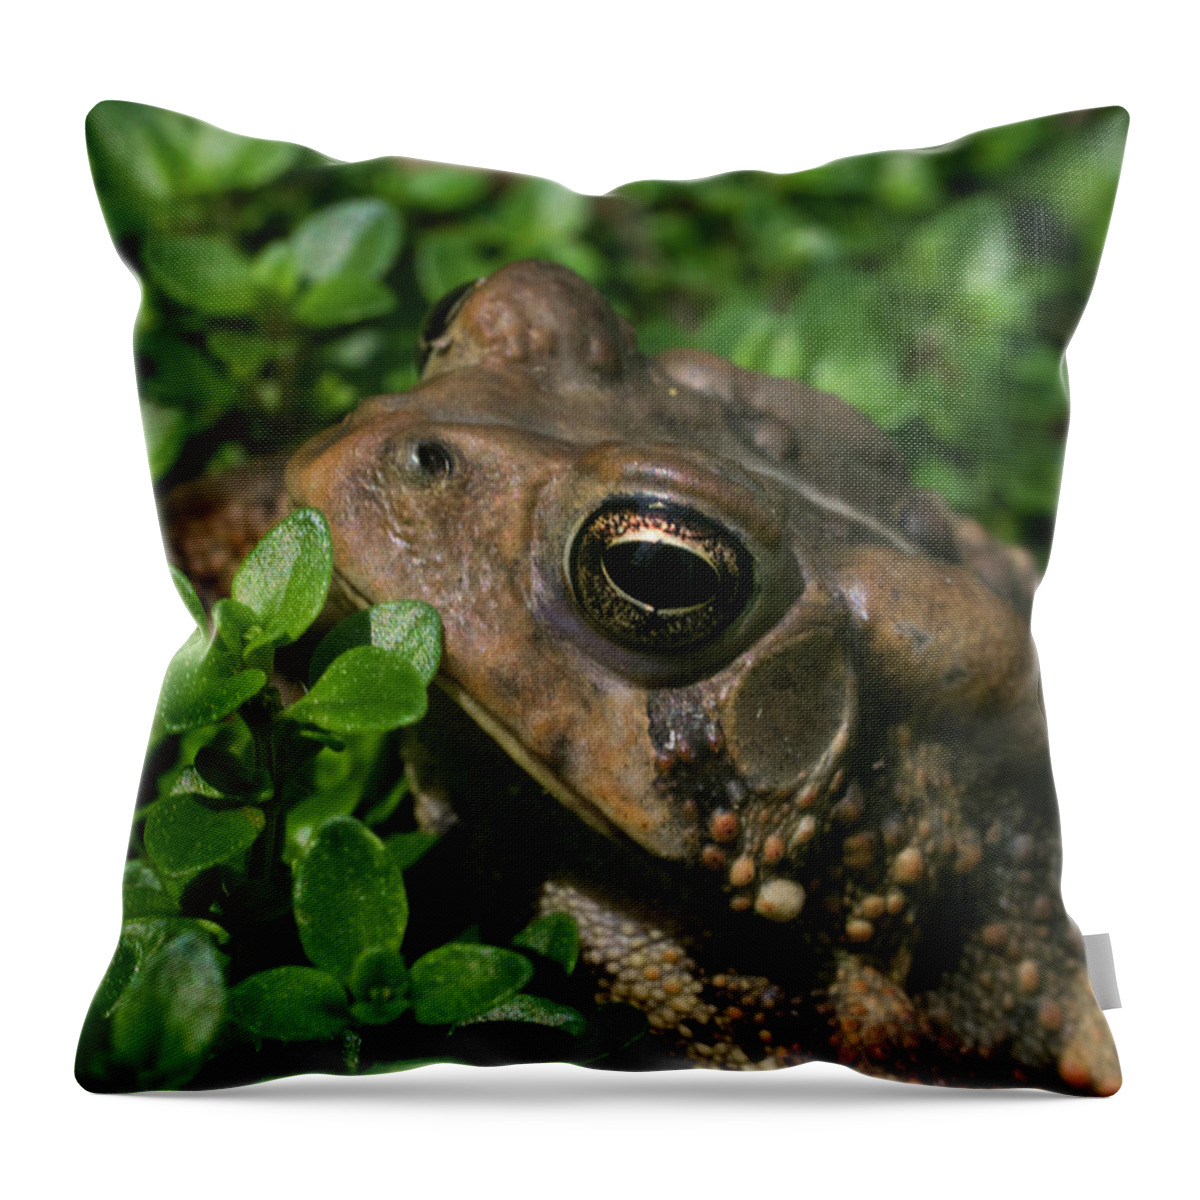 Toad Throw Pillow featuring the photograph Toad Eyeball to Eyeball by Douglas Barnett